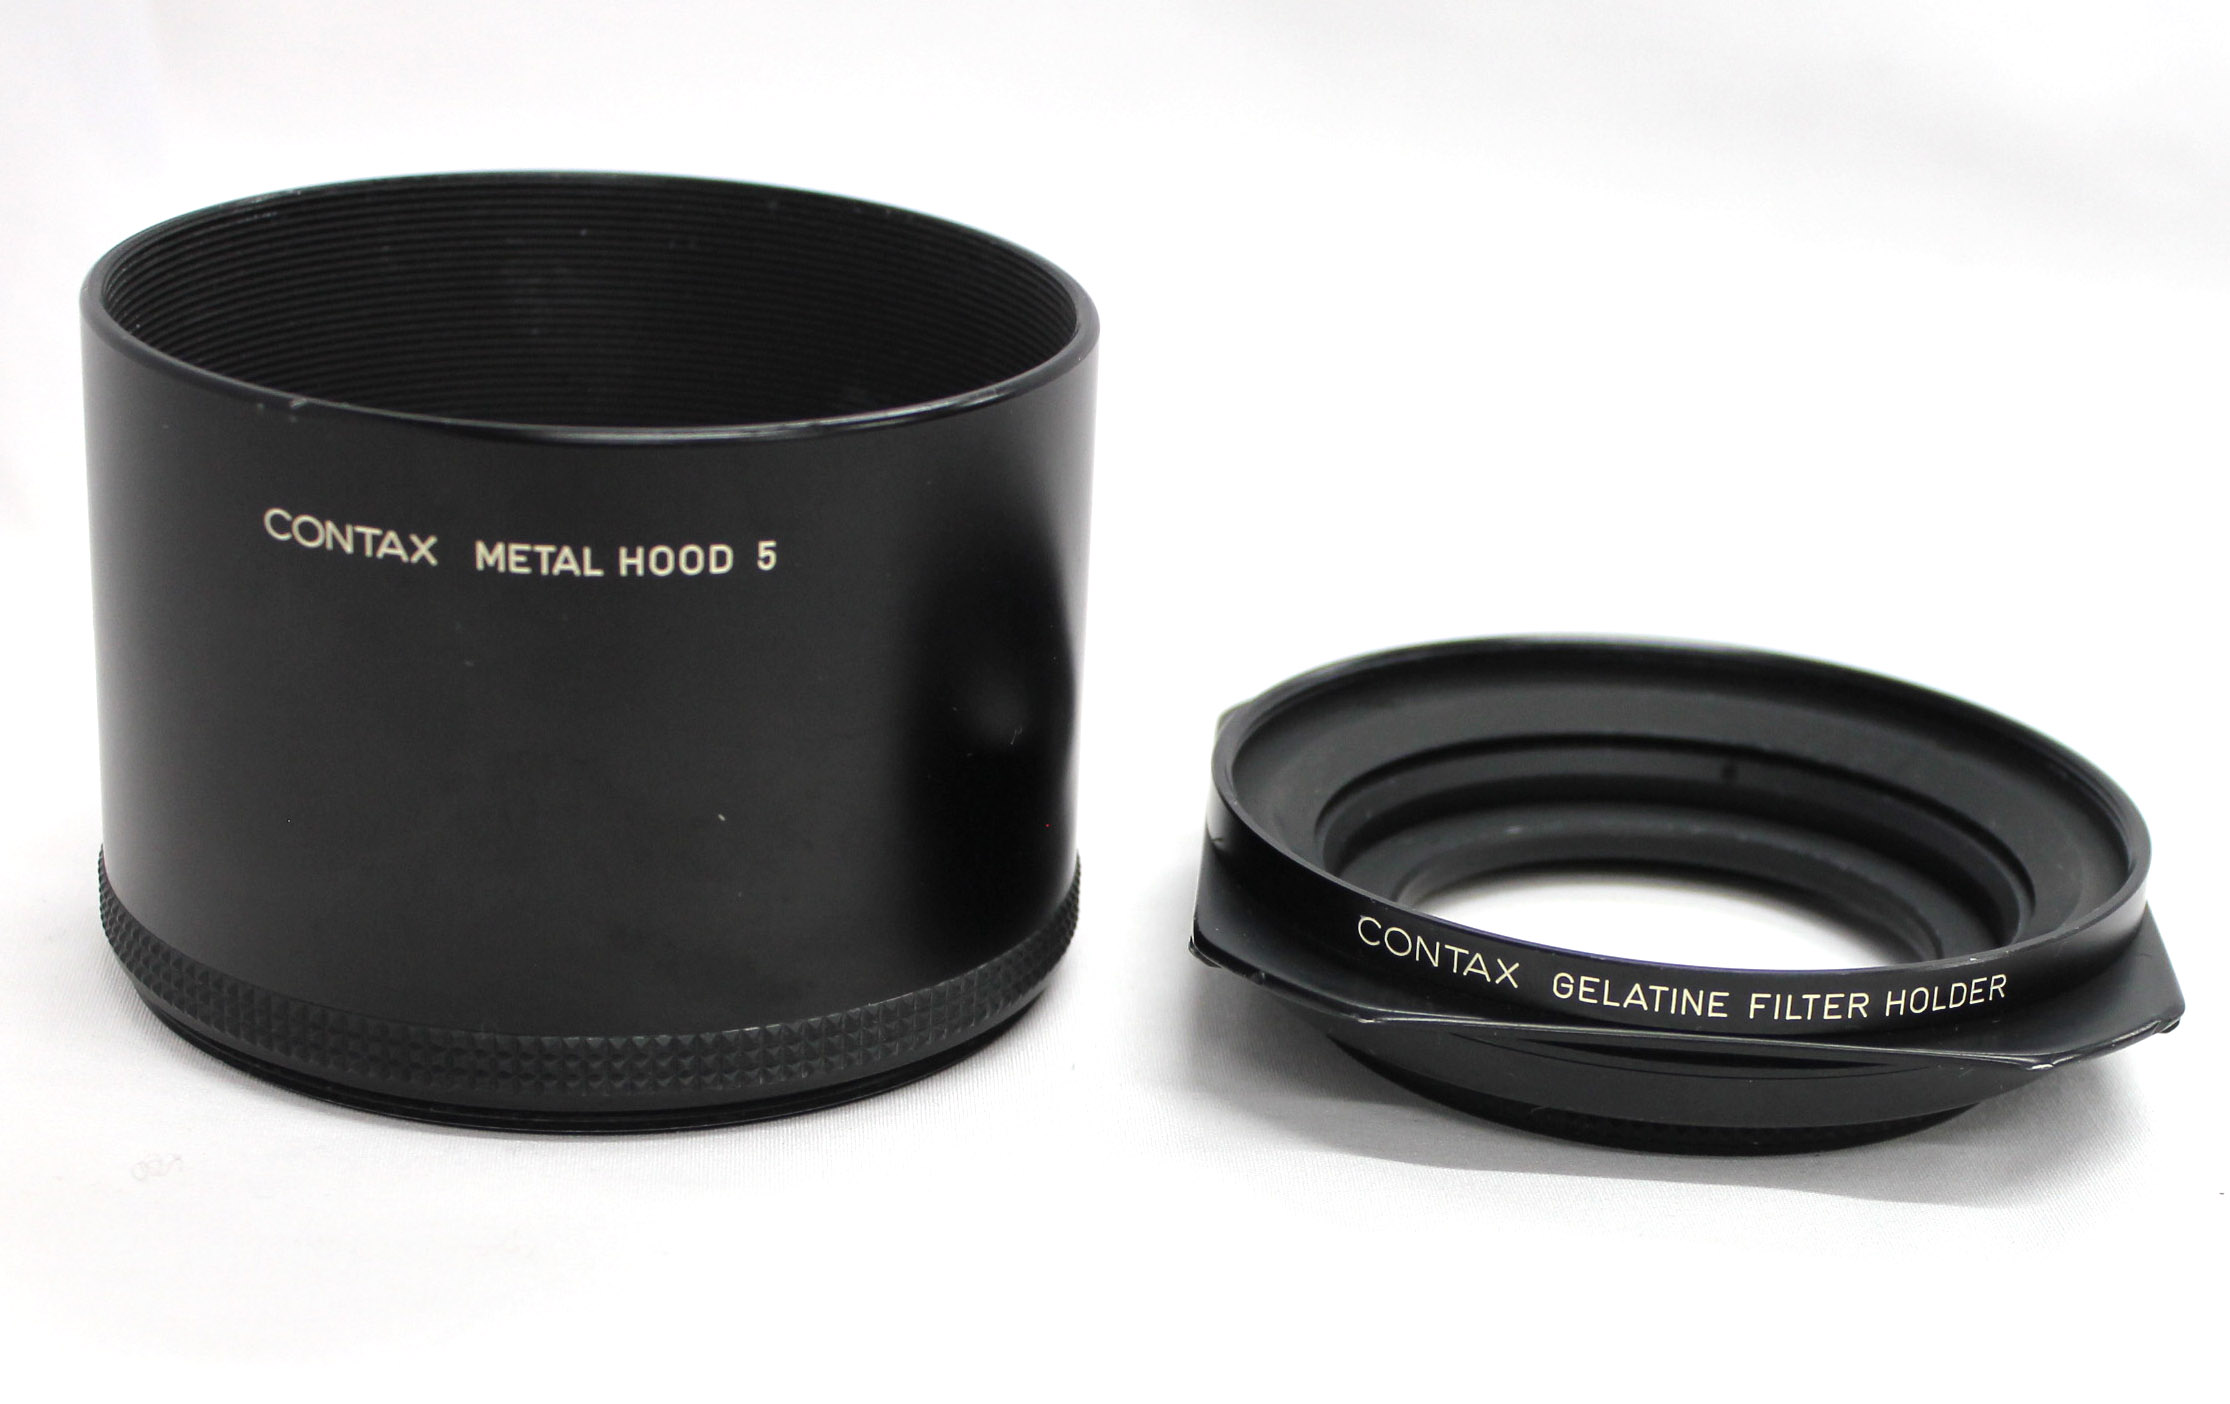 Japan Used Camera Shop | [Exc+++++] Contax Metal Hood 5 with Gelatine Filter Holder from Japan